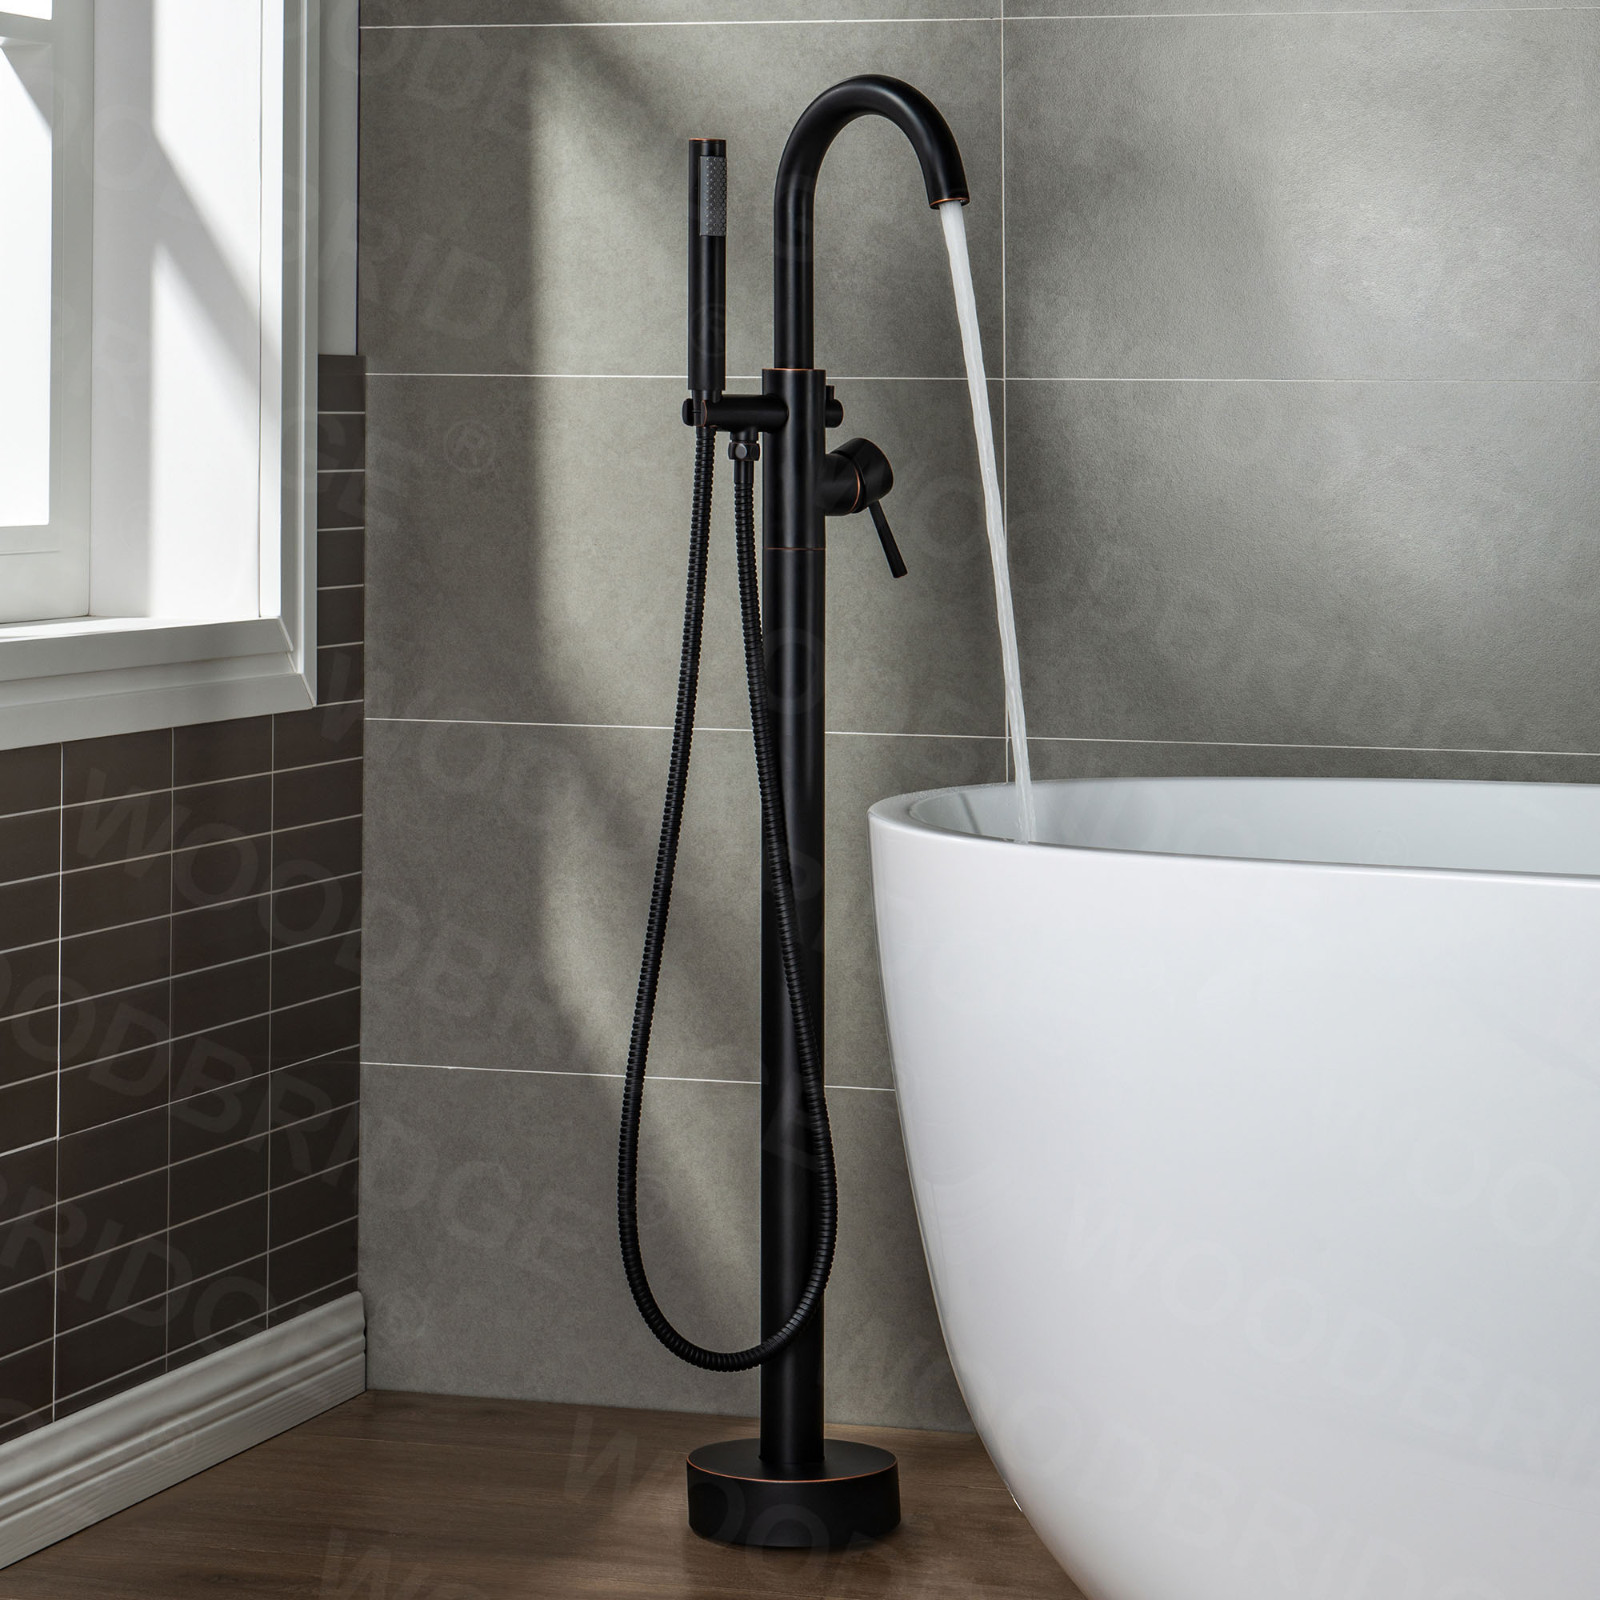  WOODBRIDGE F0010ORBRD Contemporary Single Handle Floor Mount Freestanding Tub Filler Faucet with Hand shower in Oil Rubbed Bronze Finish._9704